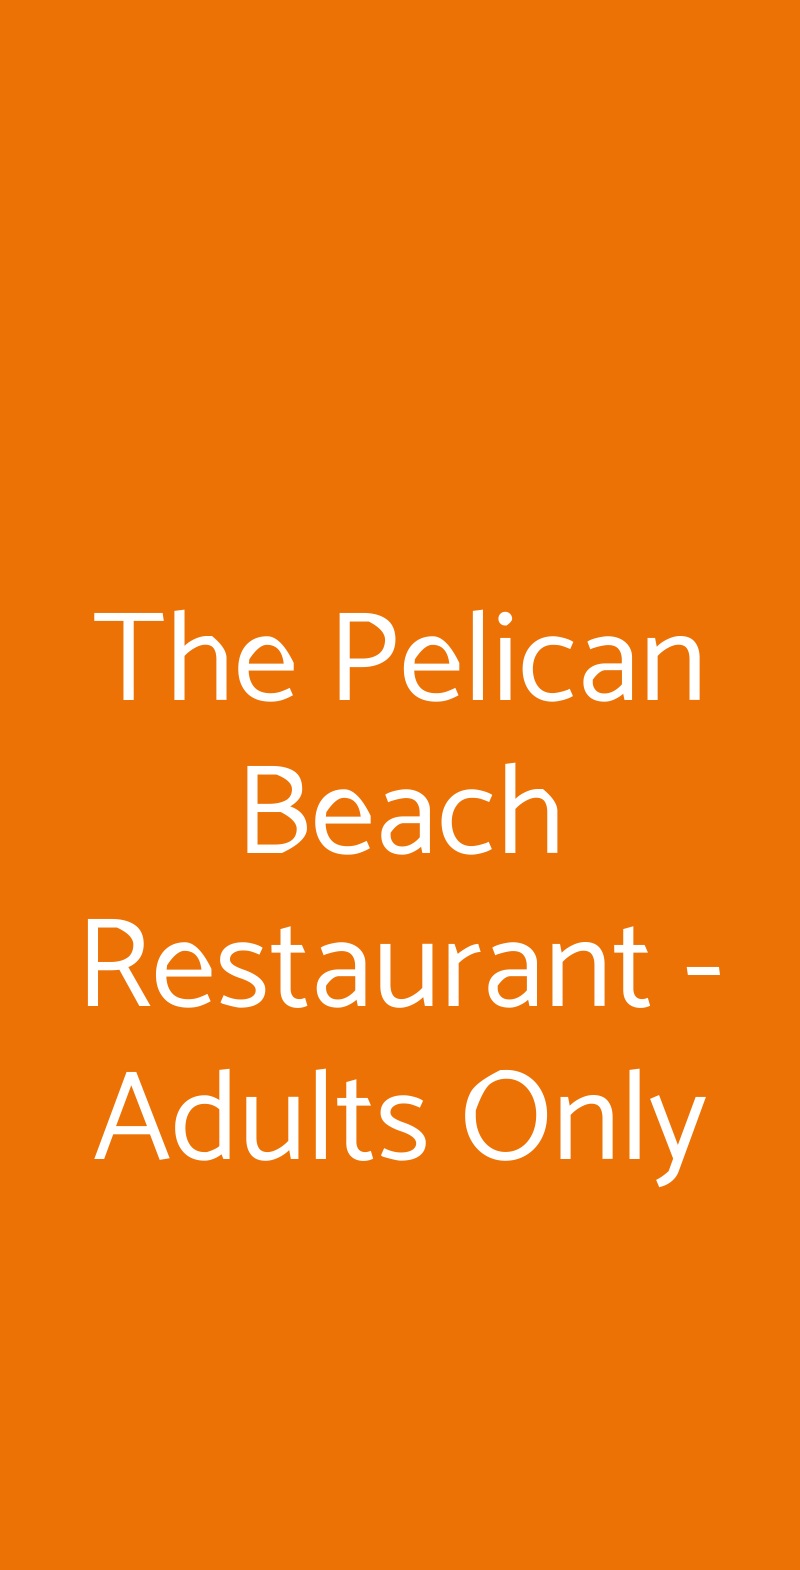 The Pelican Beach Restaurant - Adults Only Olbia menù 1 pagina